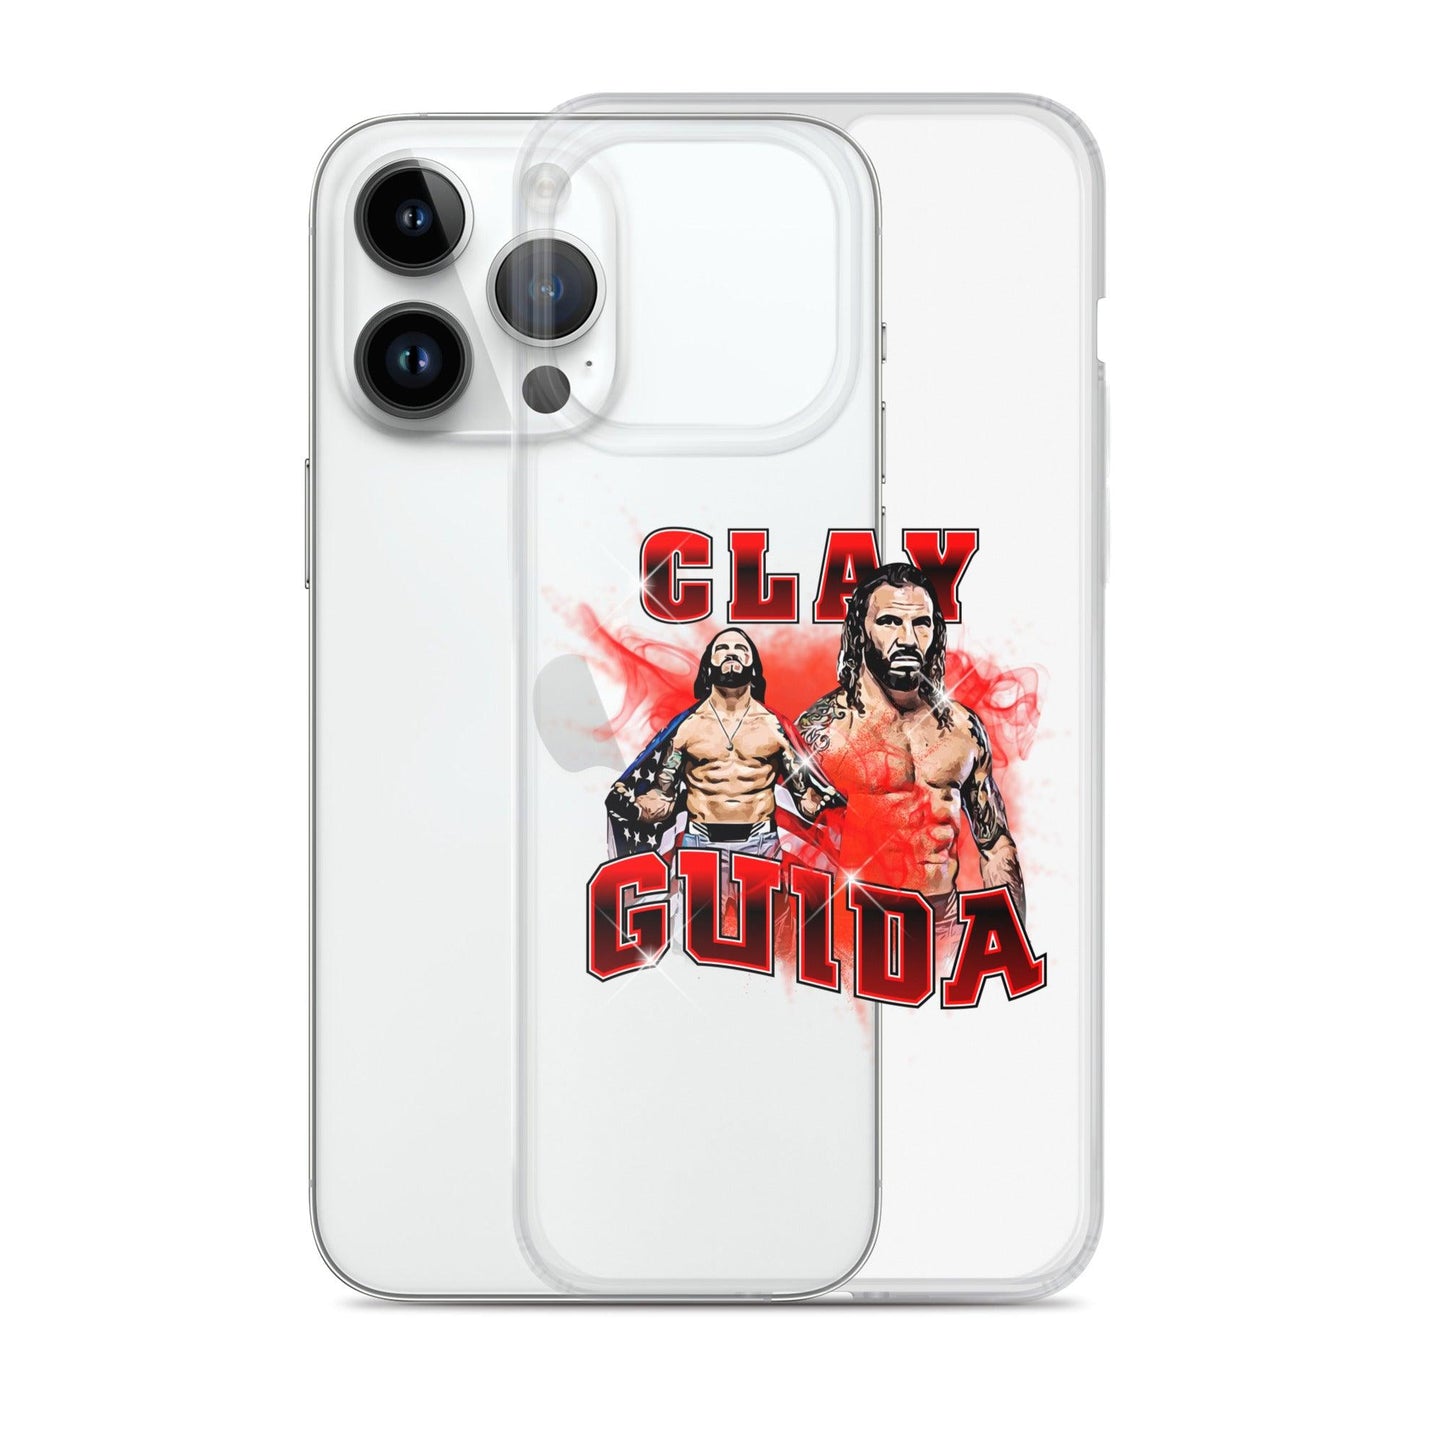 Clay Guida "Vintage" iPhone Case - Fan Arch